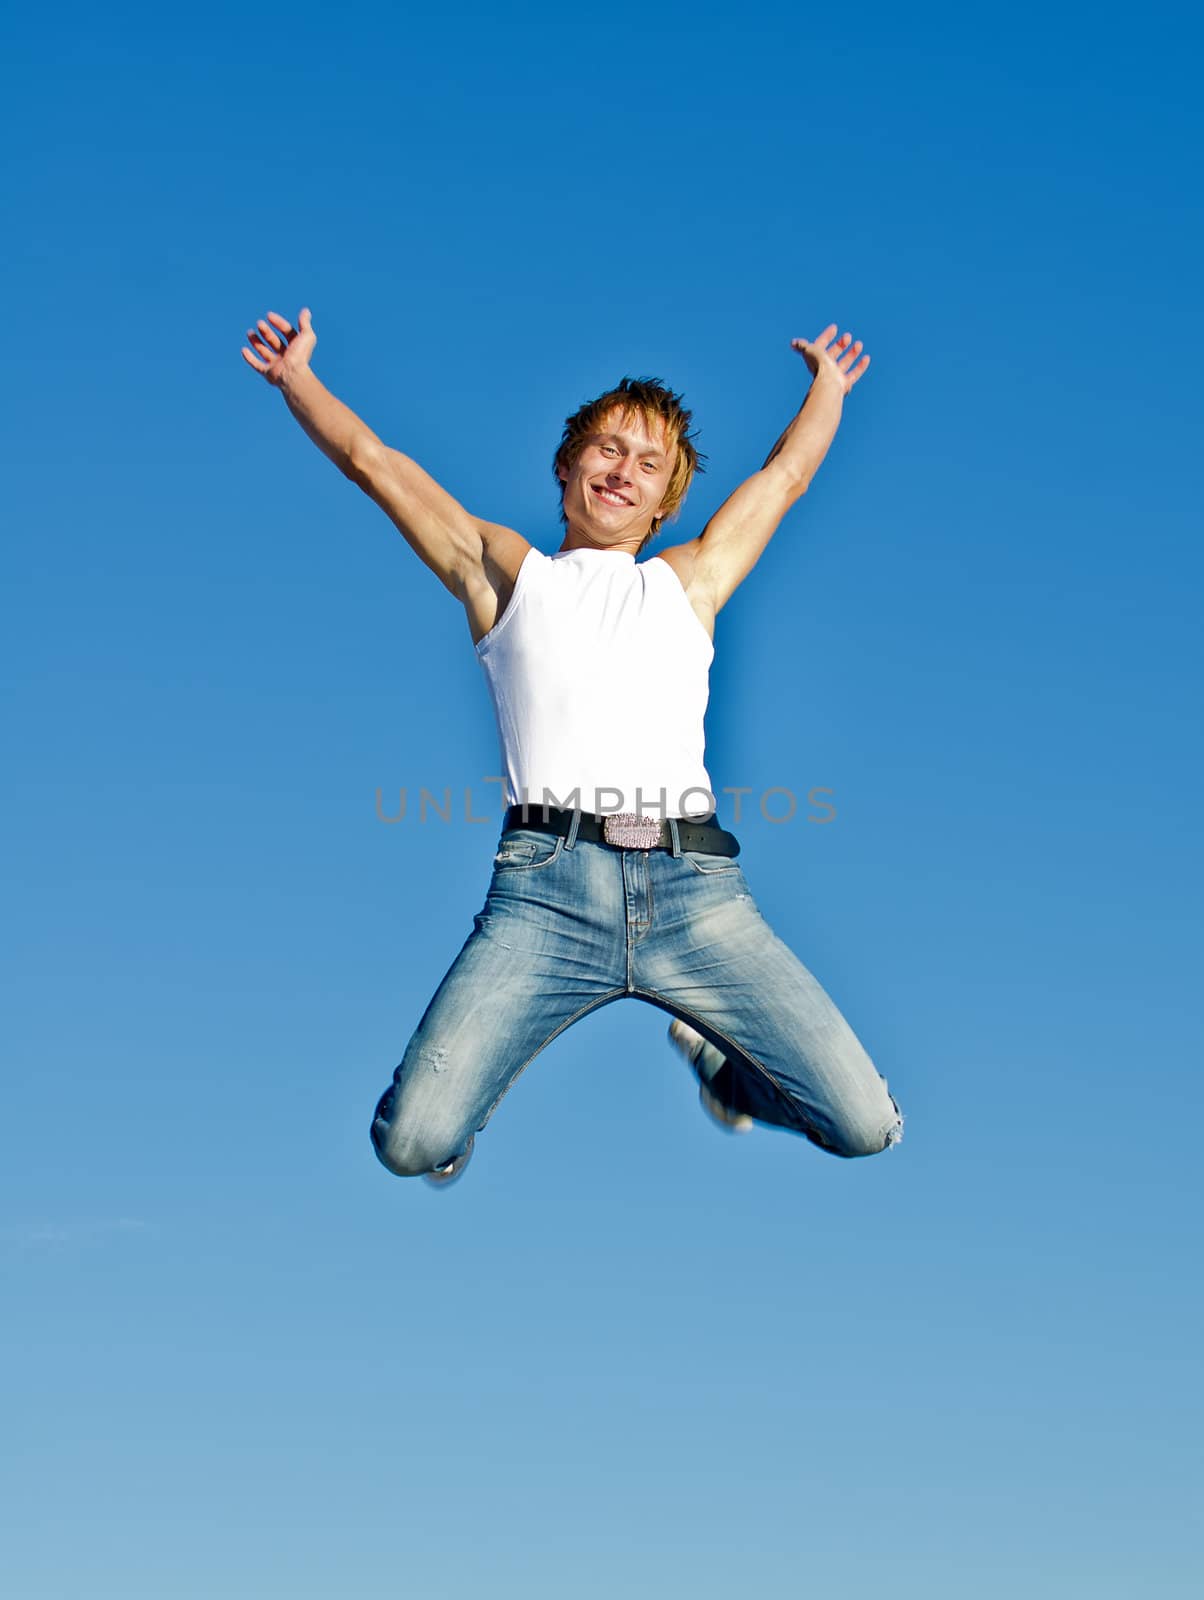 Happy jumping man on blue sky background by dmitrimaruta